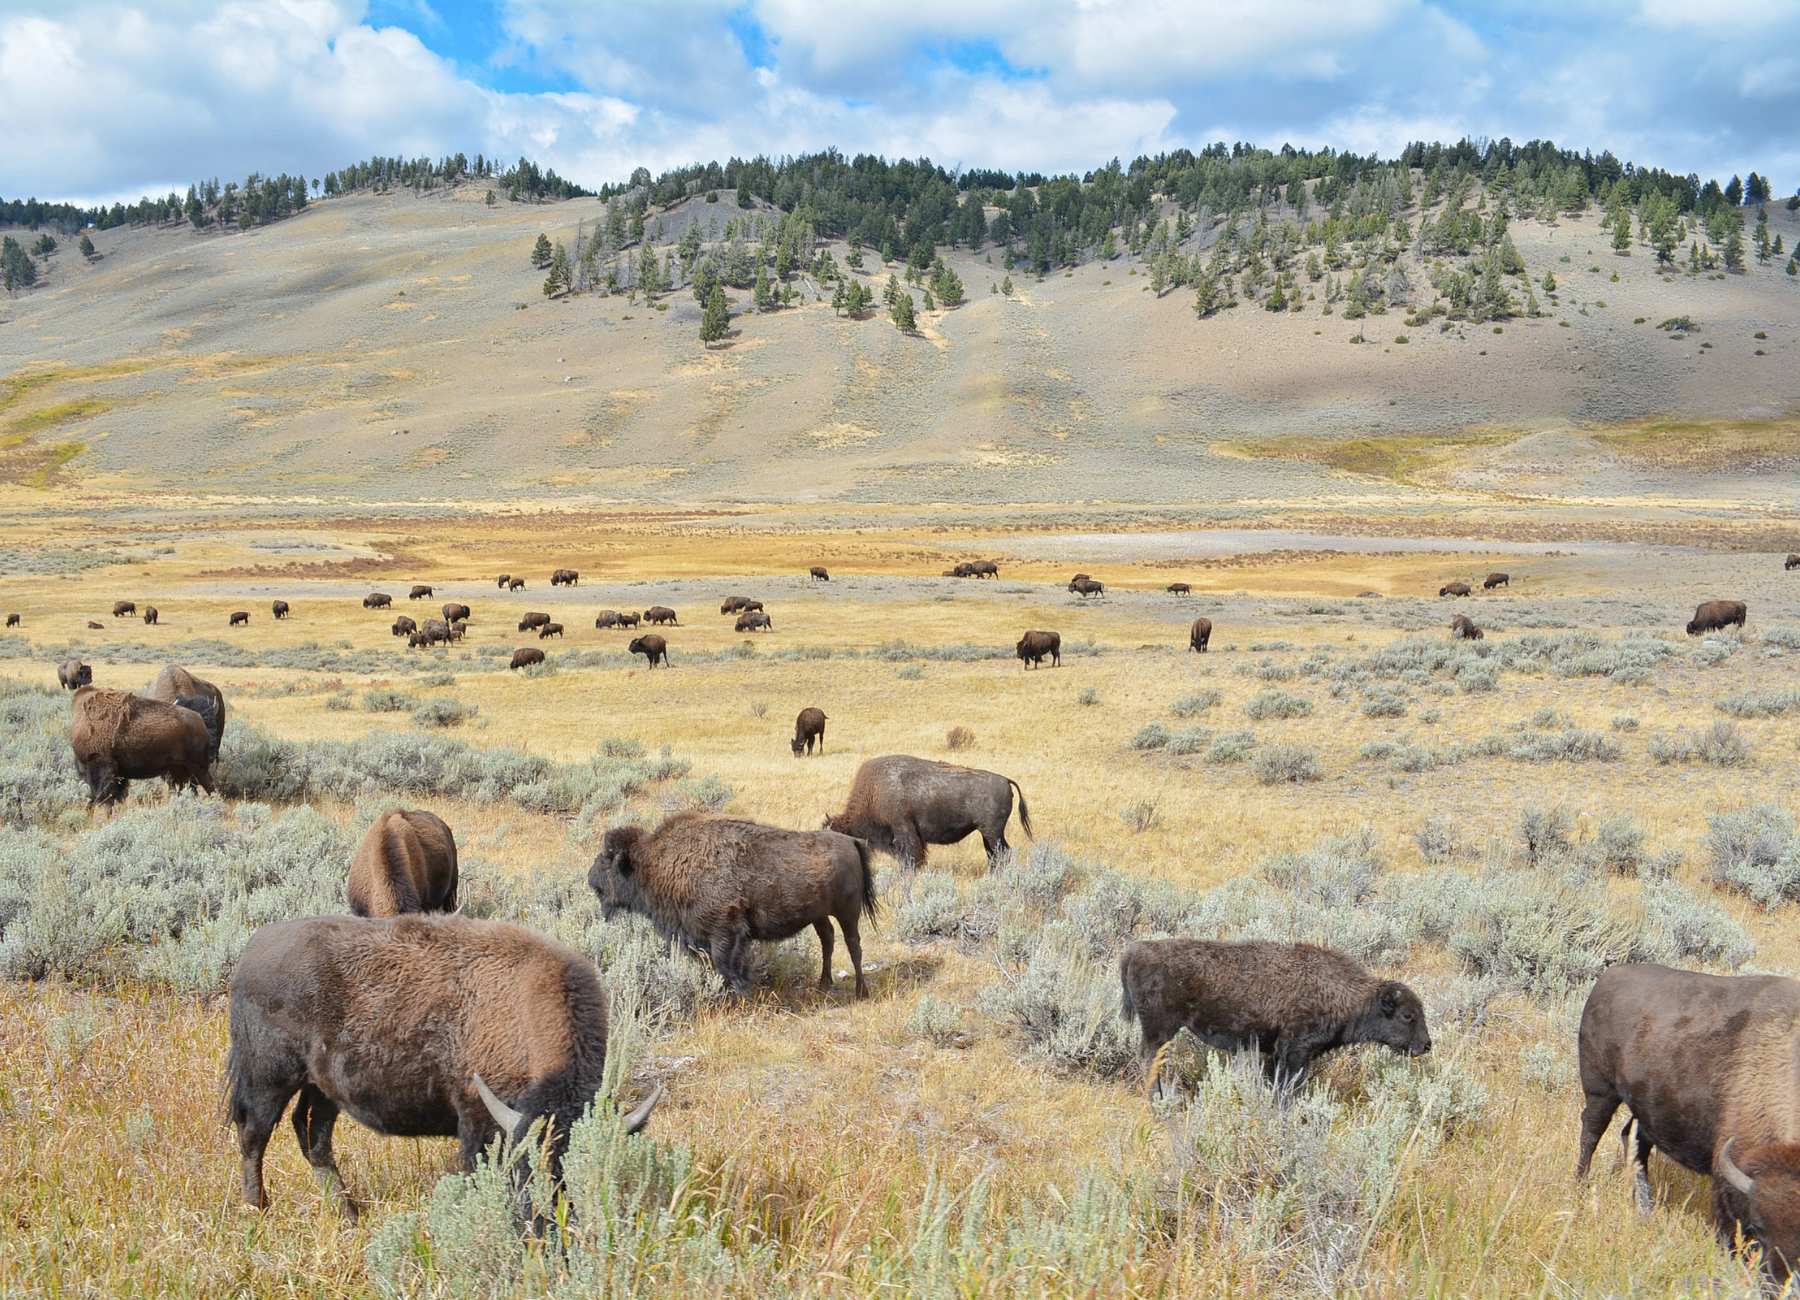 Where Should I Stay in Yellowstone? - Just Ahead